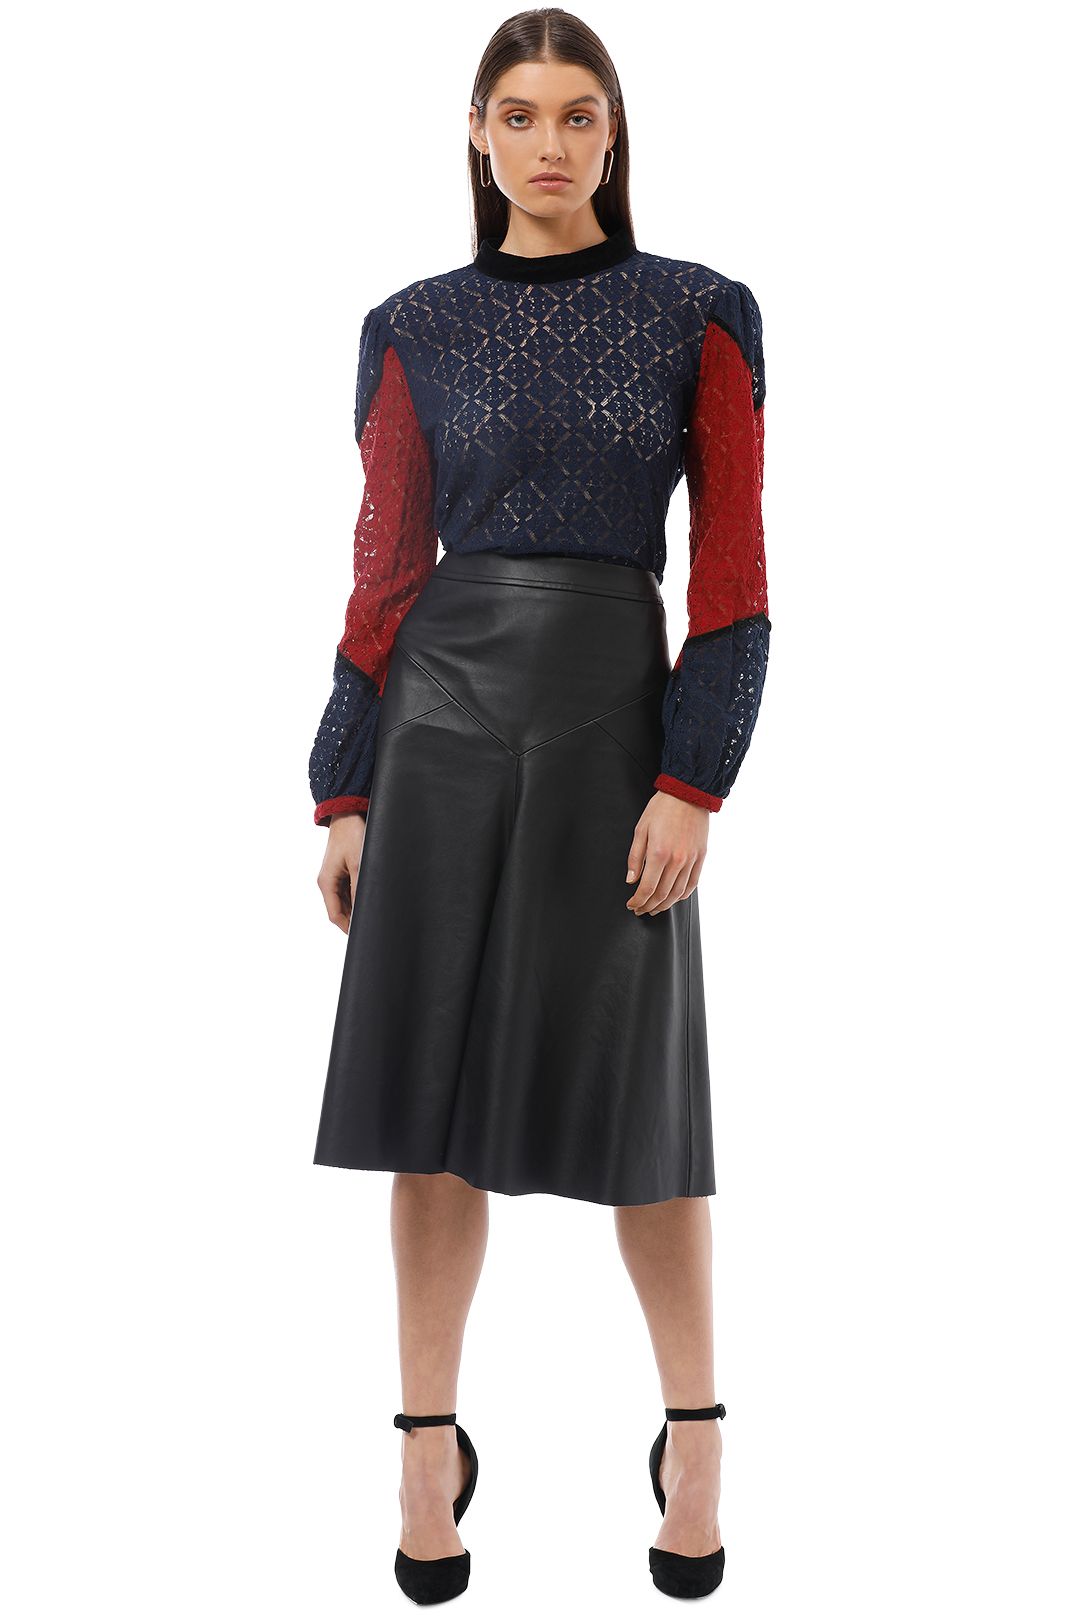 Gysette - Asilah Splice Lace Top - Navy Red - Front